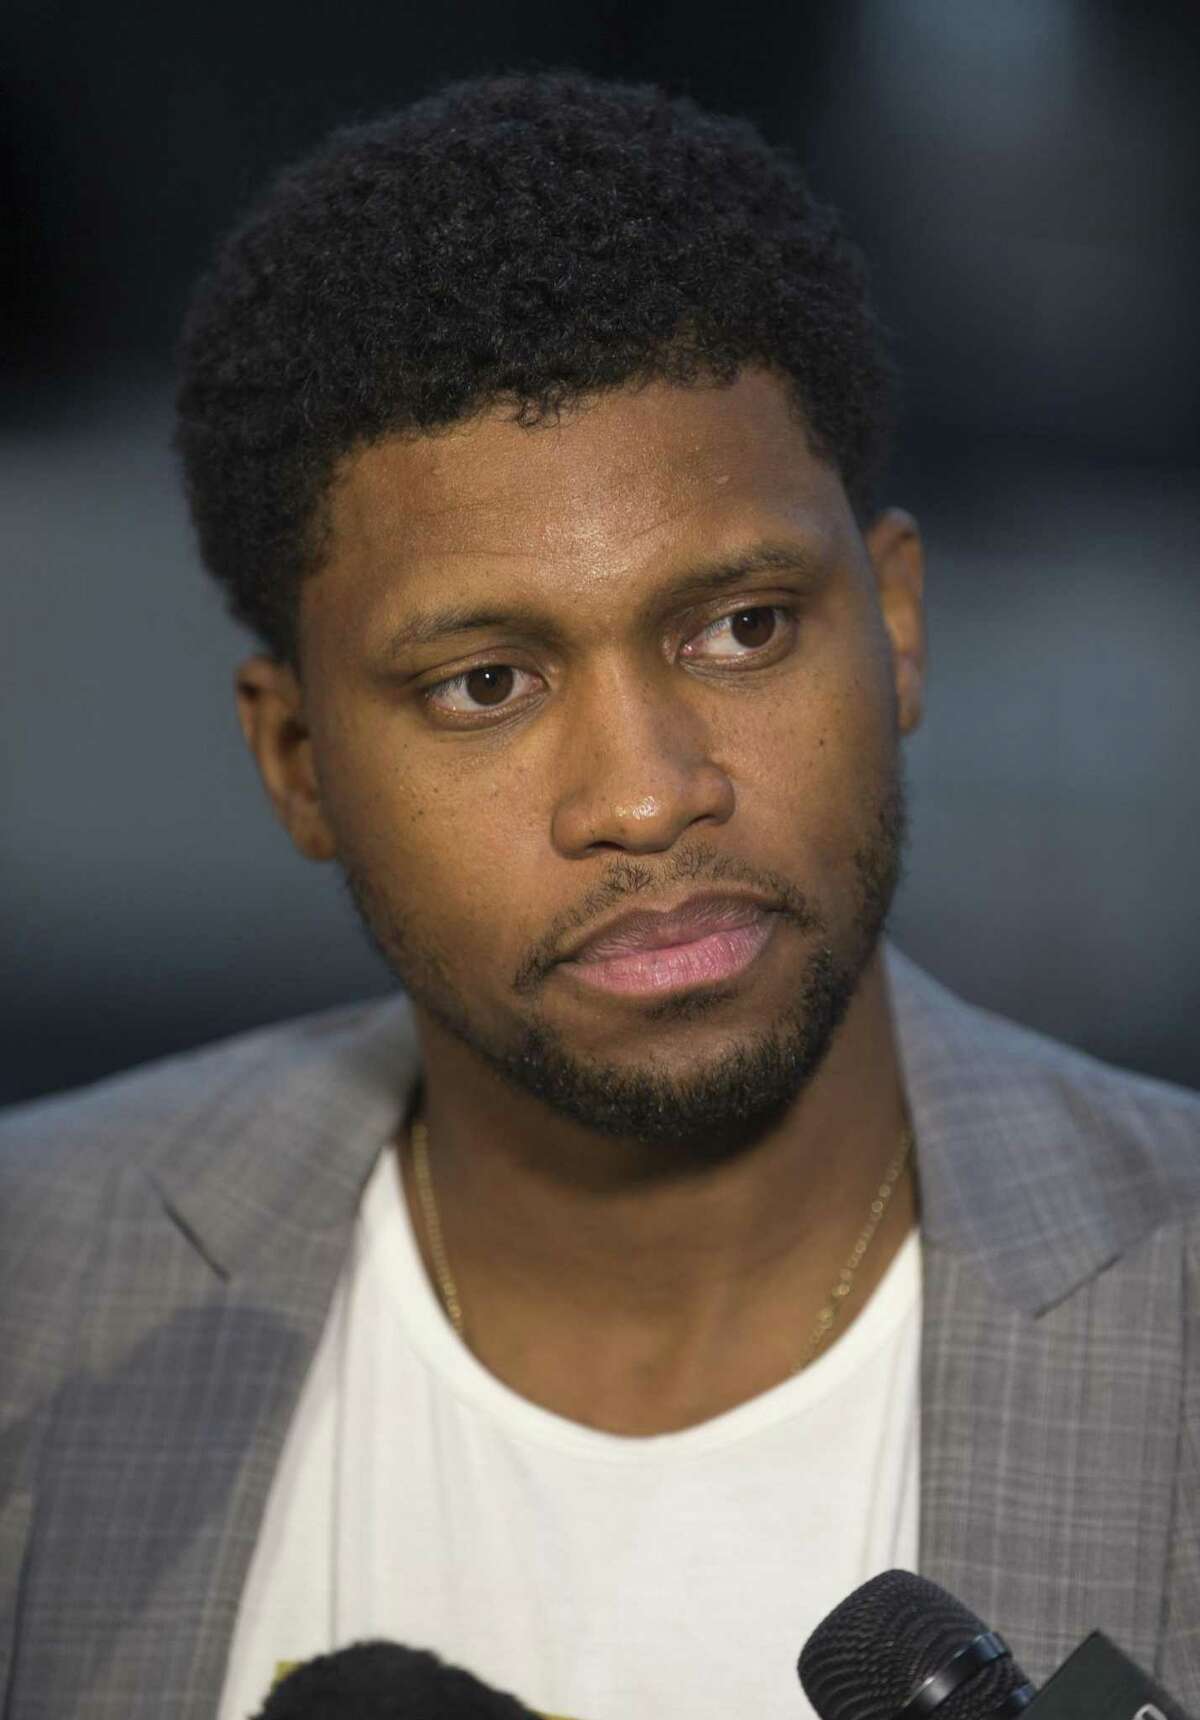 News Spurs player Rudy Gay speaks Sept. 13, 2017 to the media at the Spurs’ practice facility.